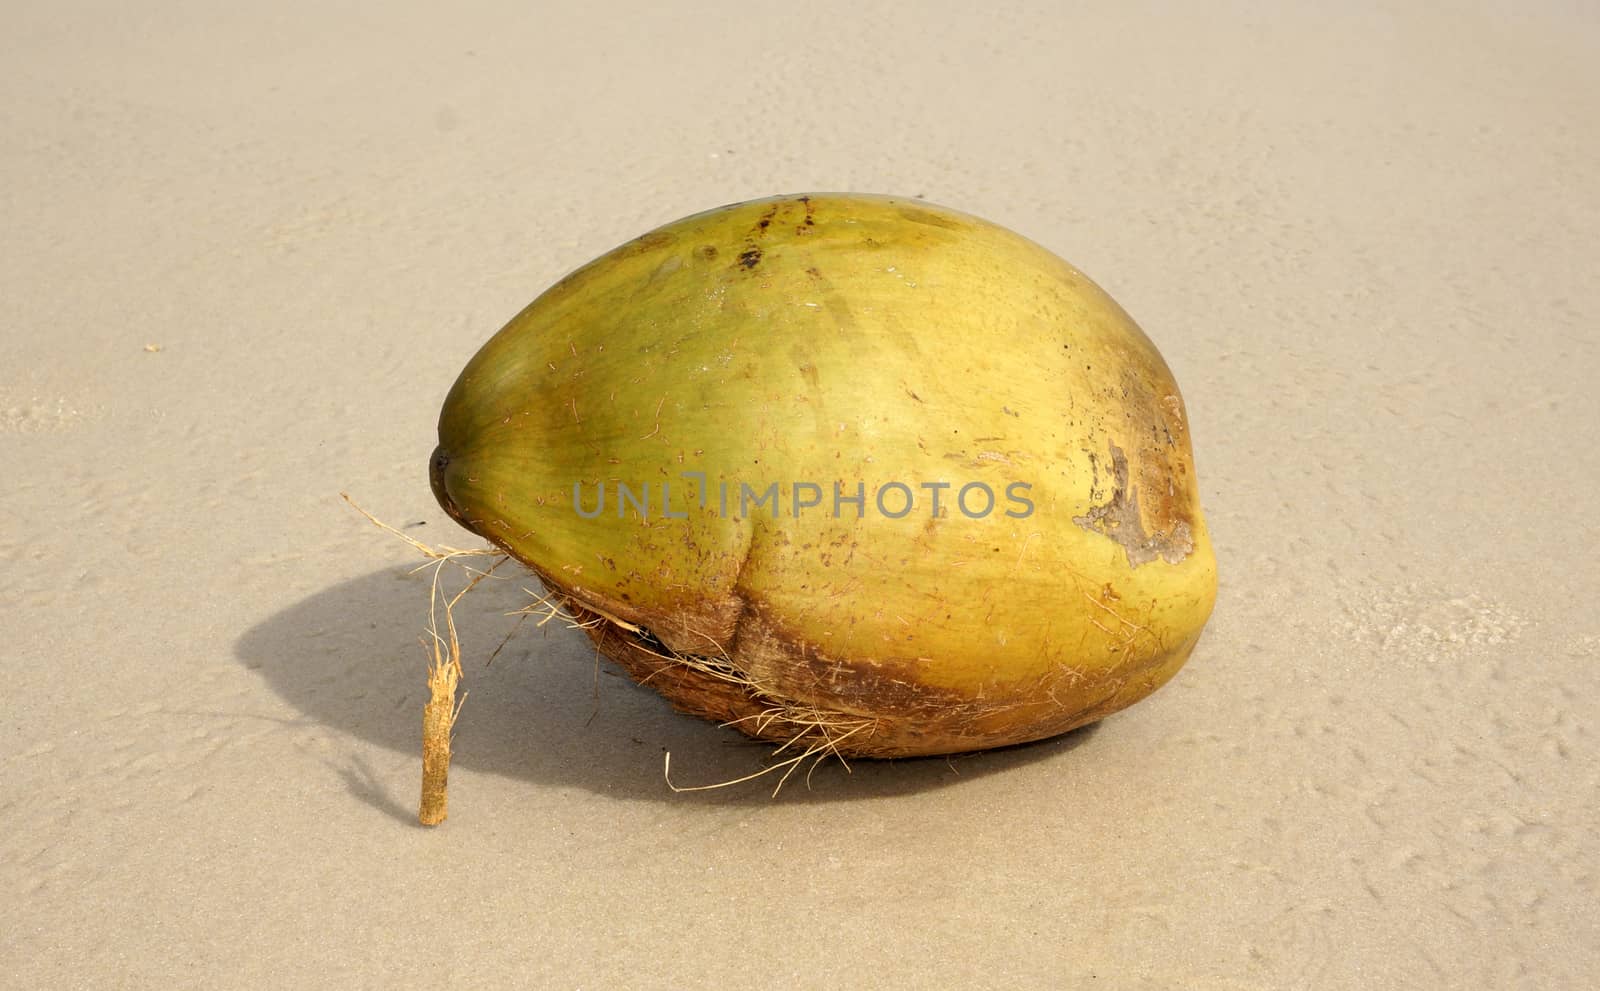 Coconut washed up on the shore of the ocean wave